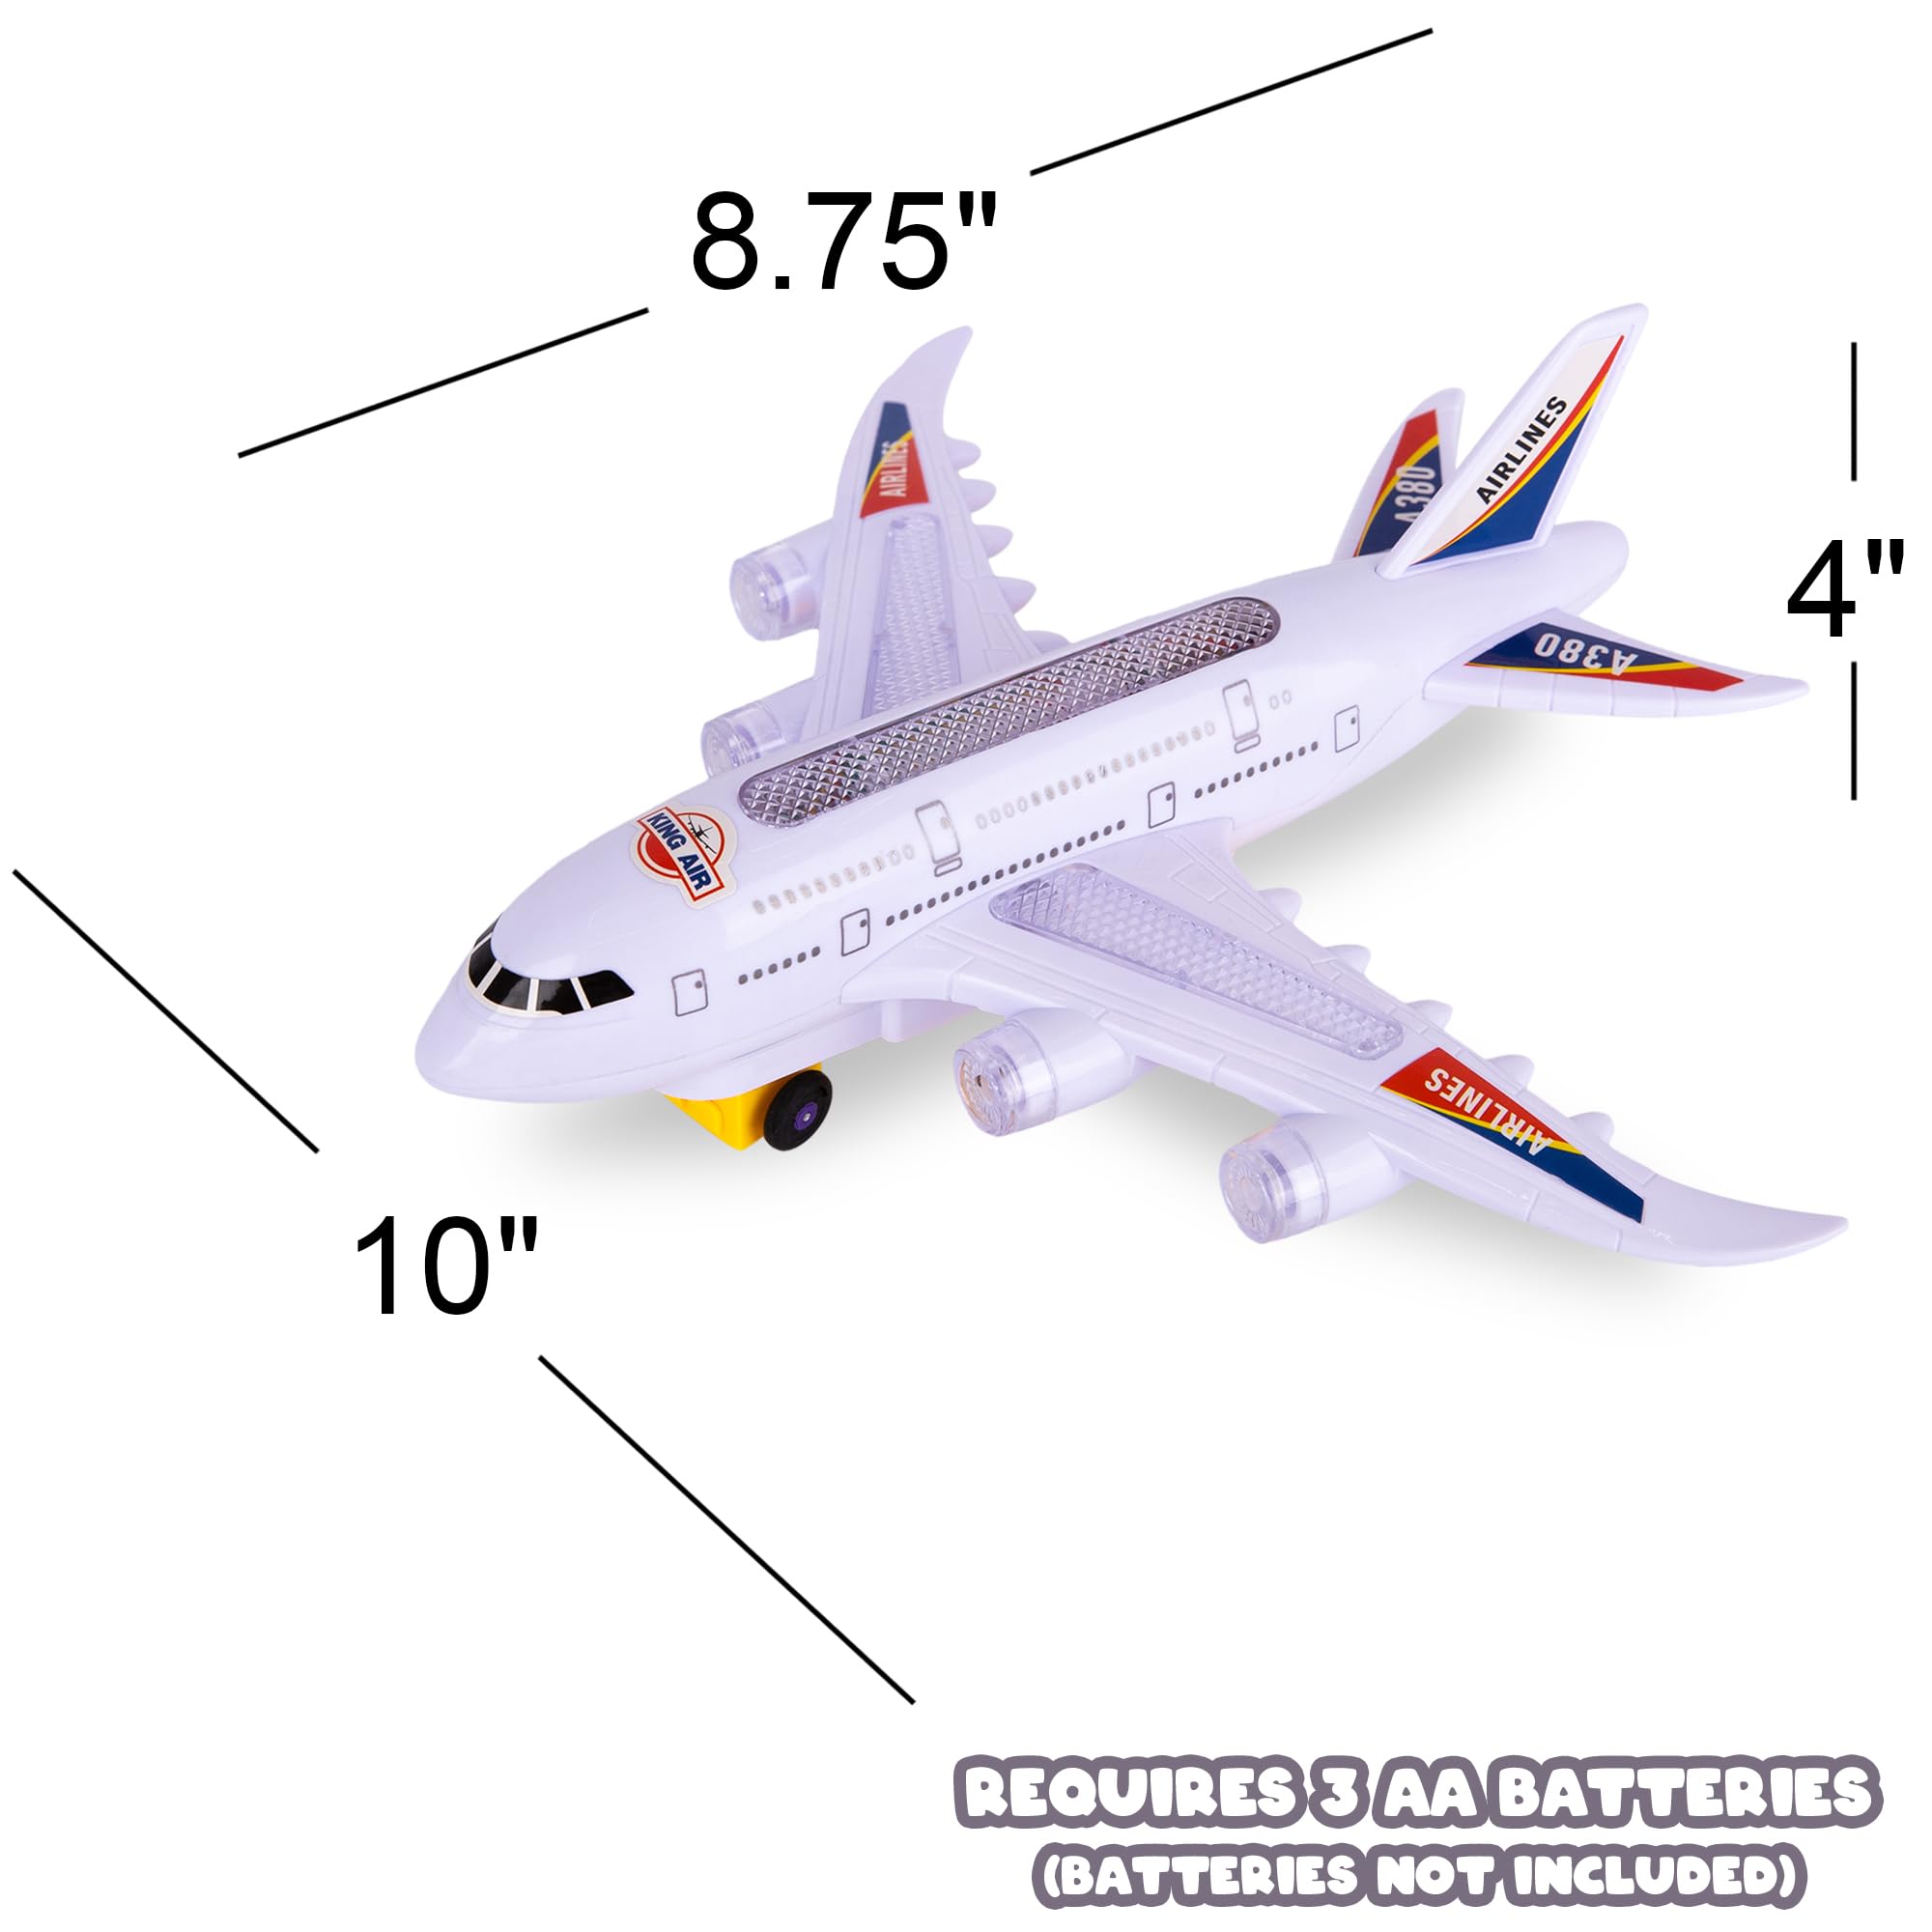 Light Up Airplane Toy - Kids Airplane Toy with Takeoff Sounds, LED Lights, and Moving Wheels - Bump and Go Airplane Toy for Kids Ages 4-8